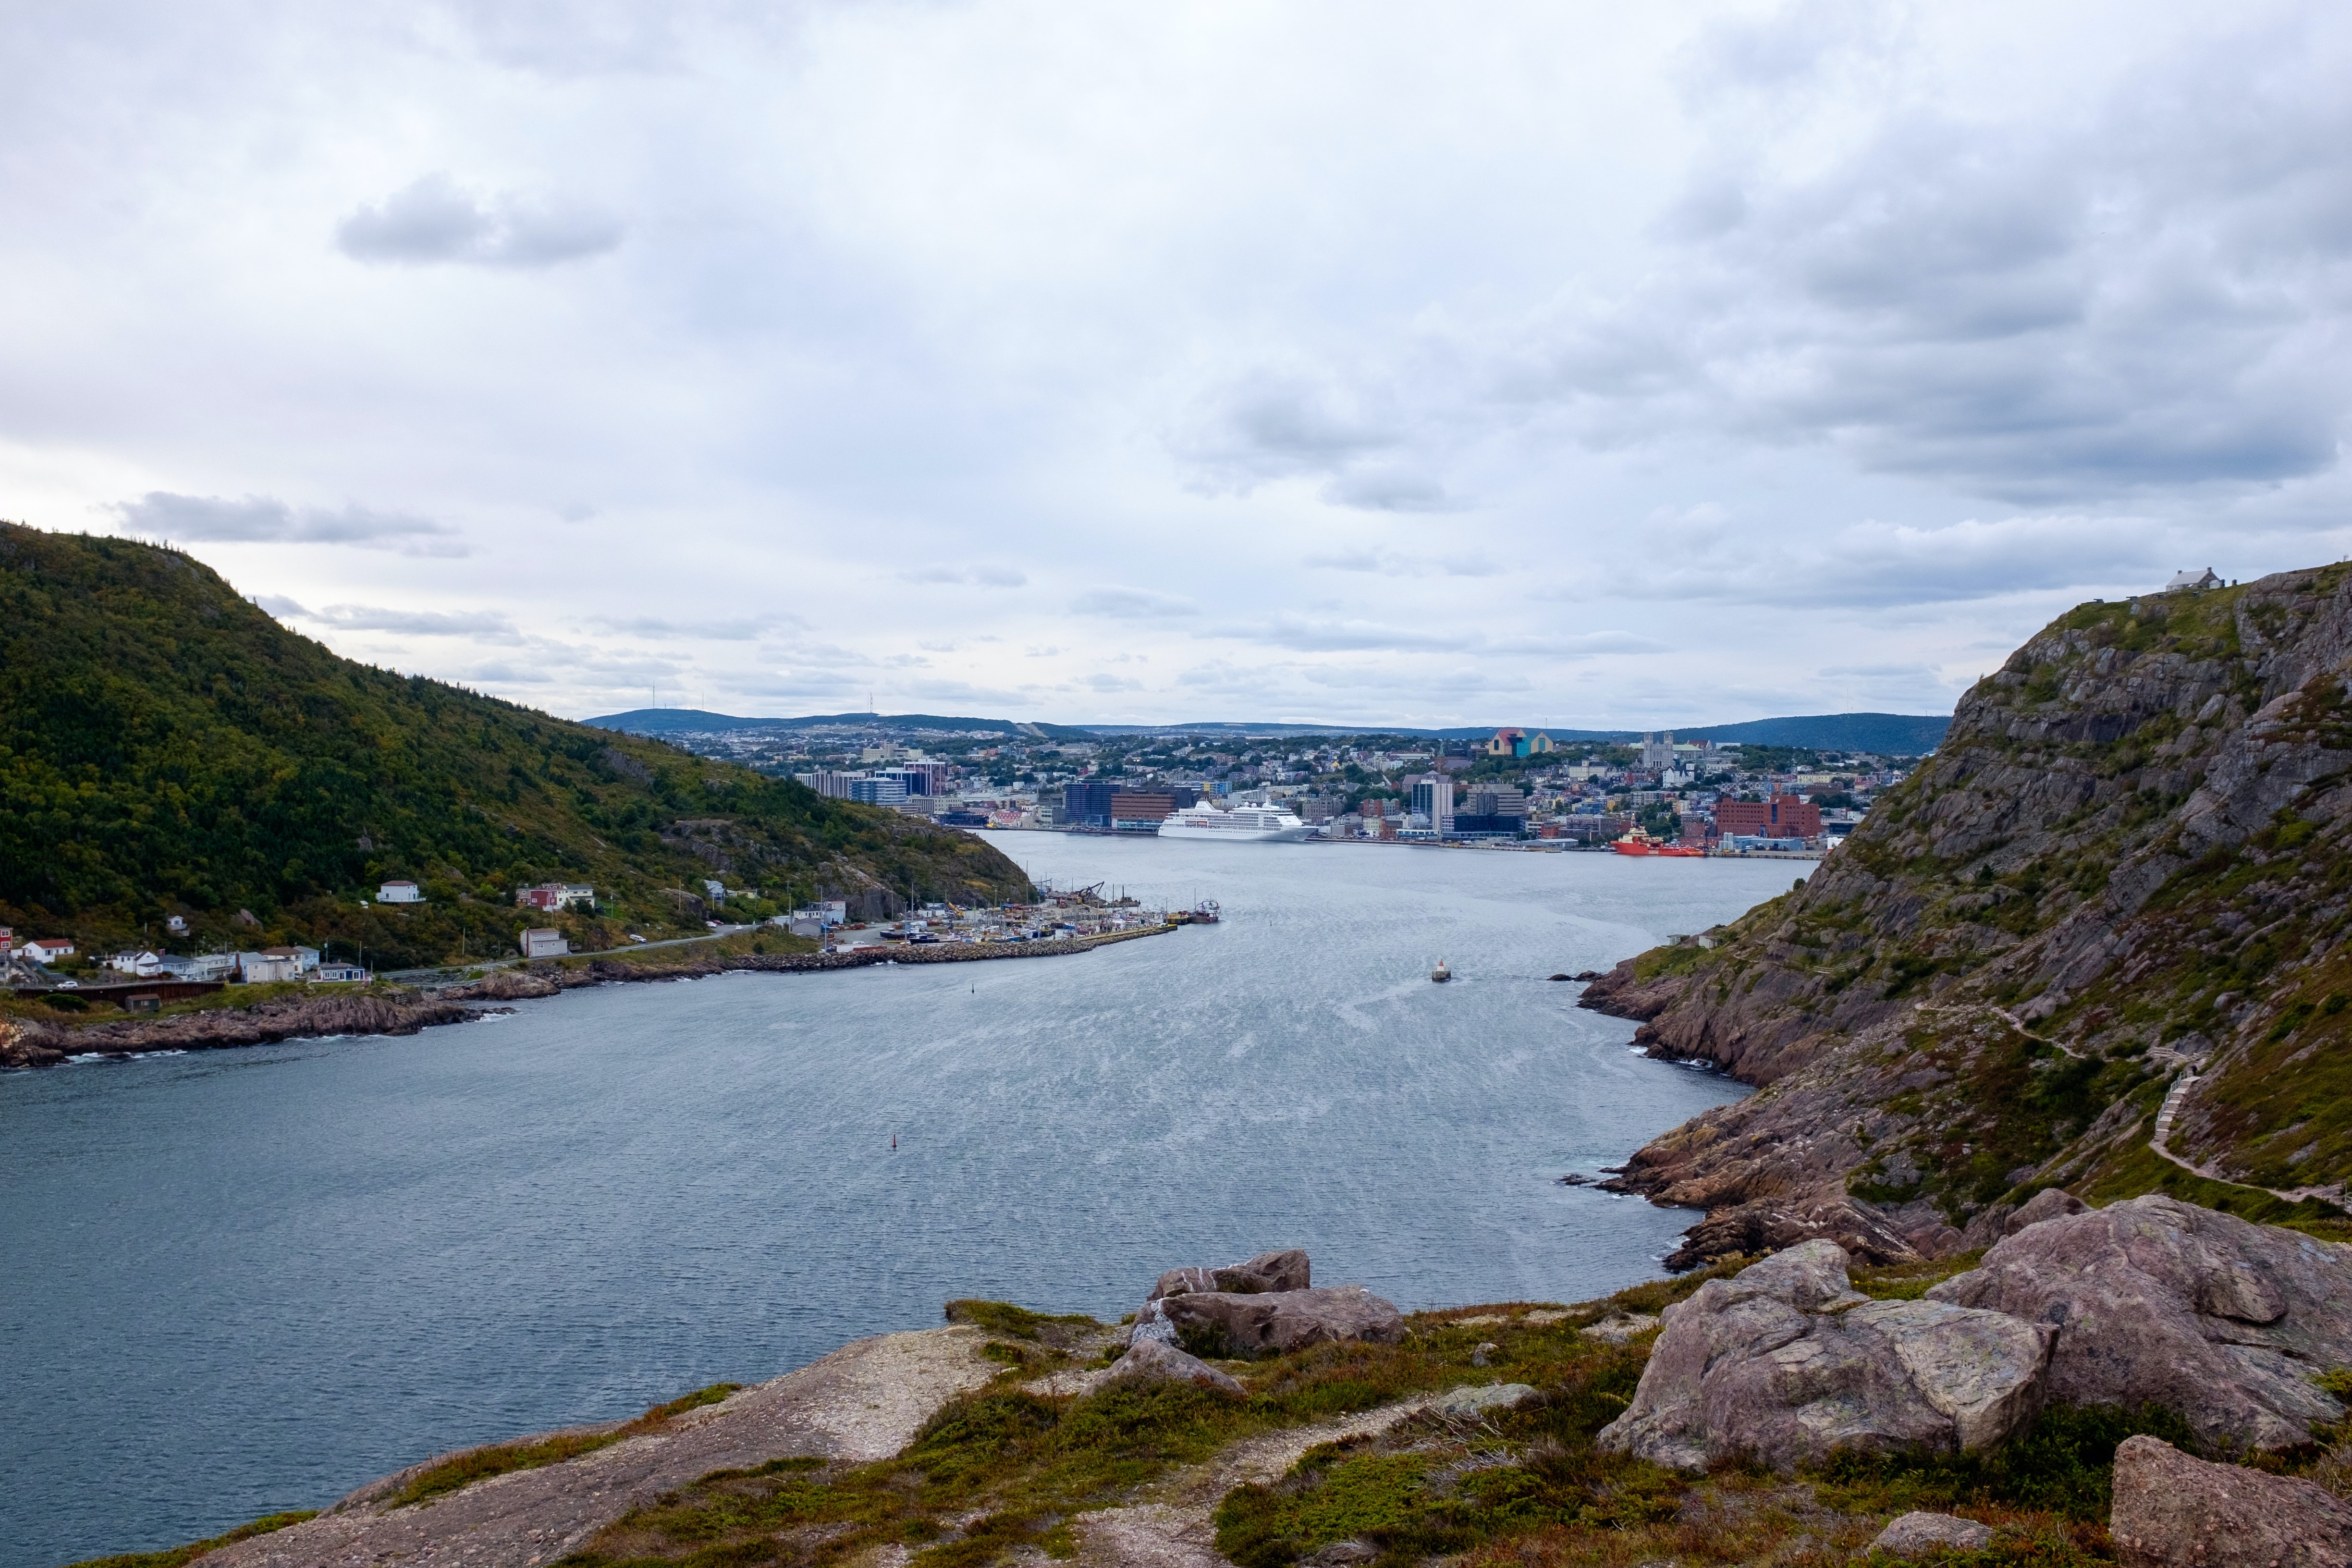 Water and mountains surrounding the city of St. John's Newfoundland,